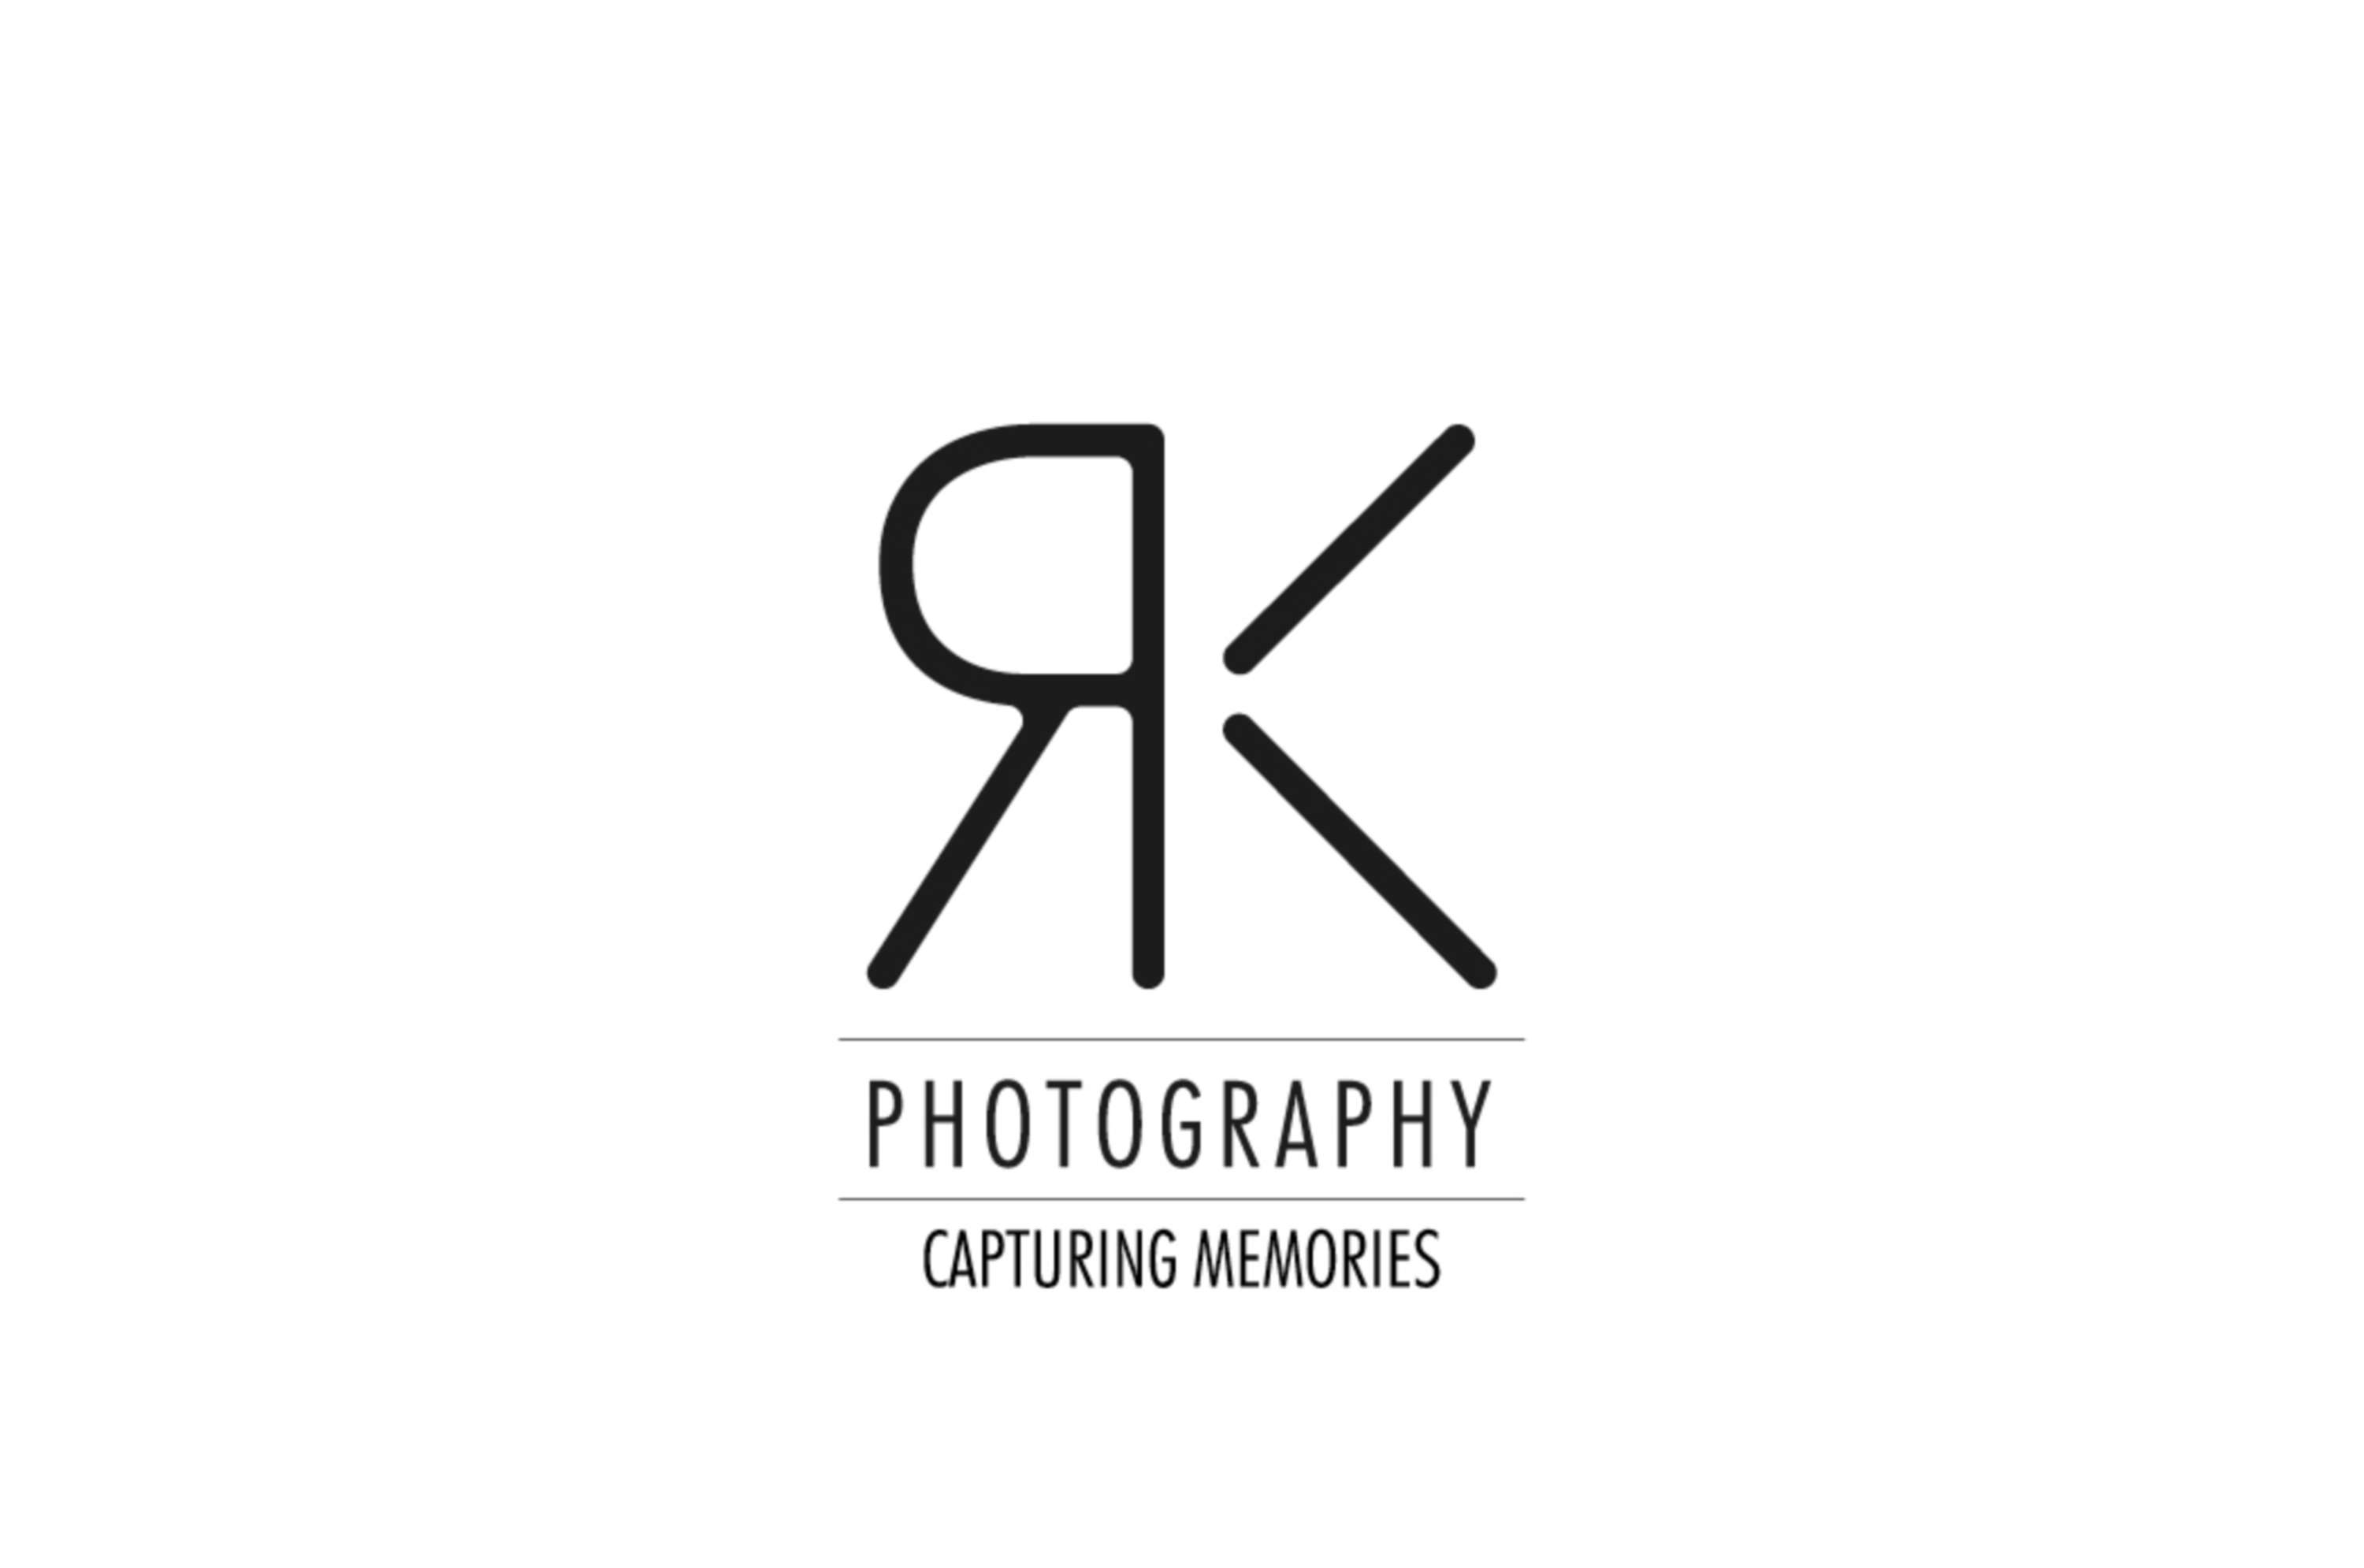 RK Logo - RK Photography | The Dots